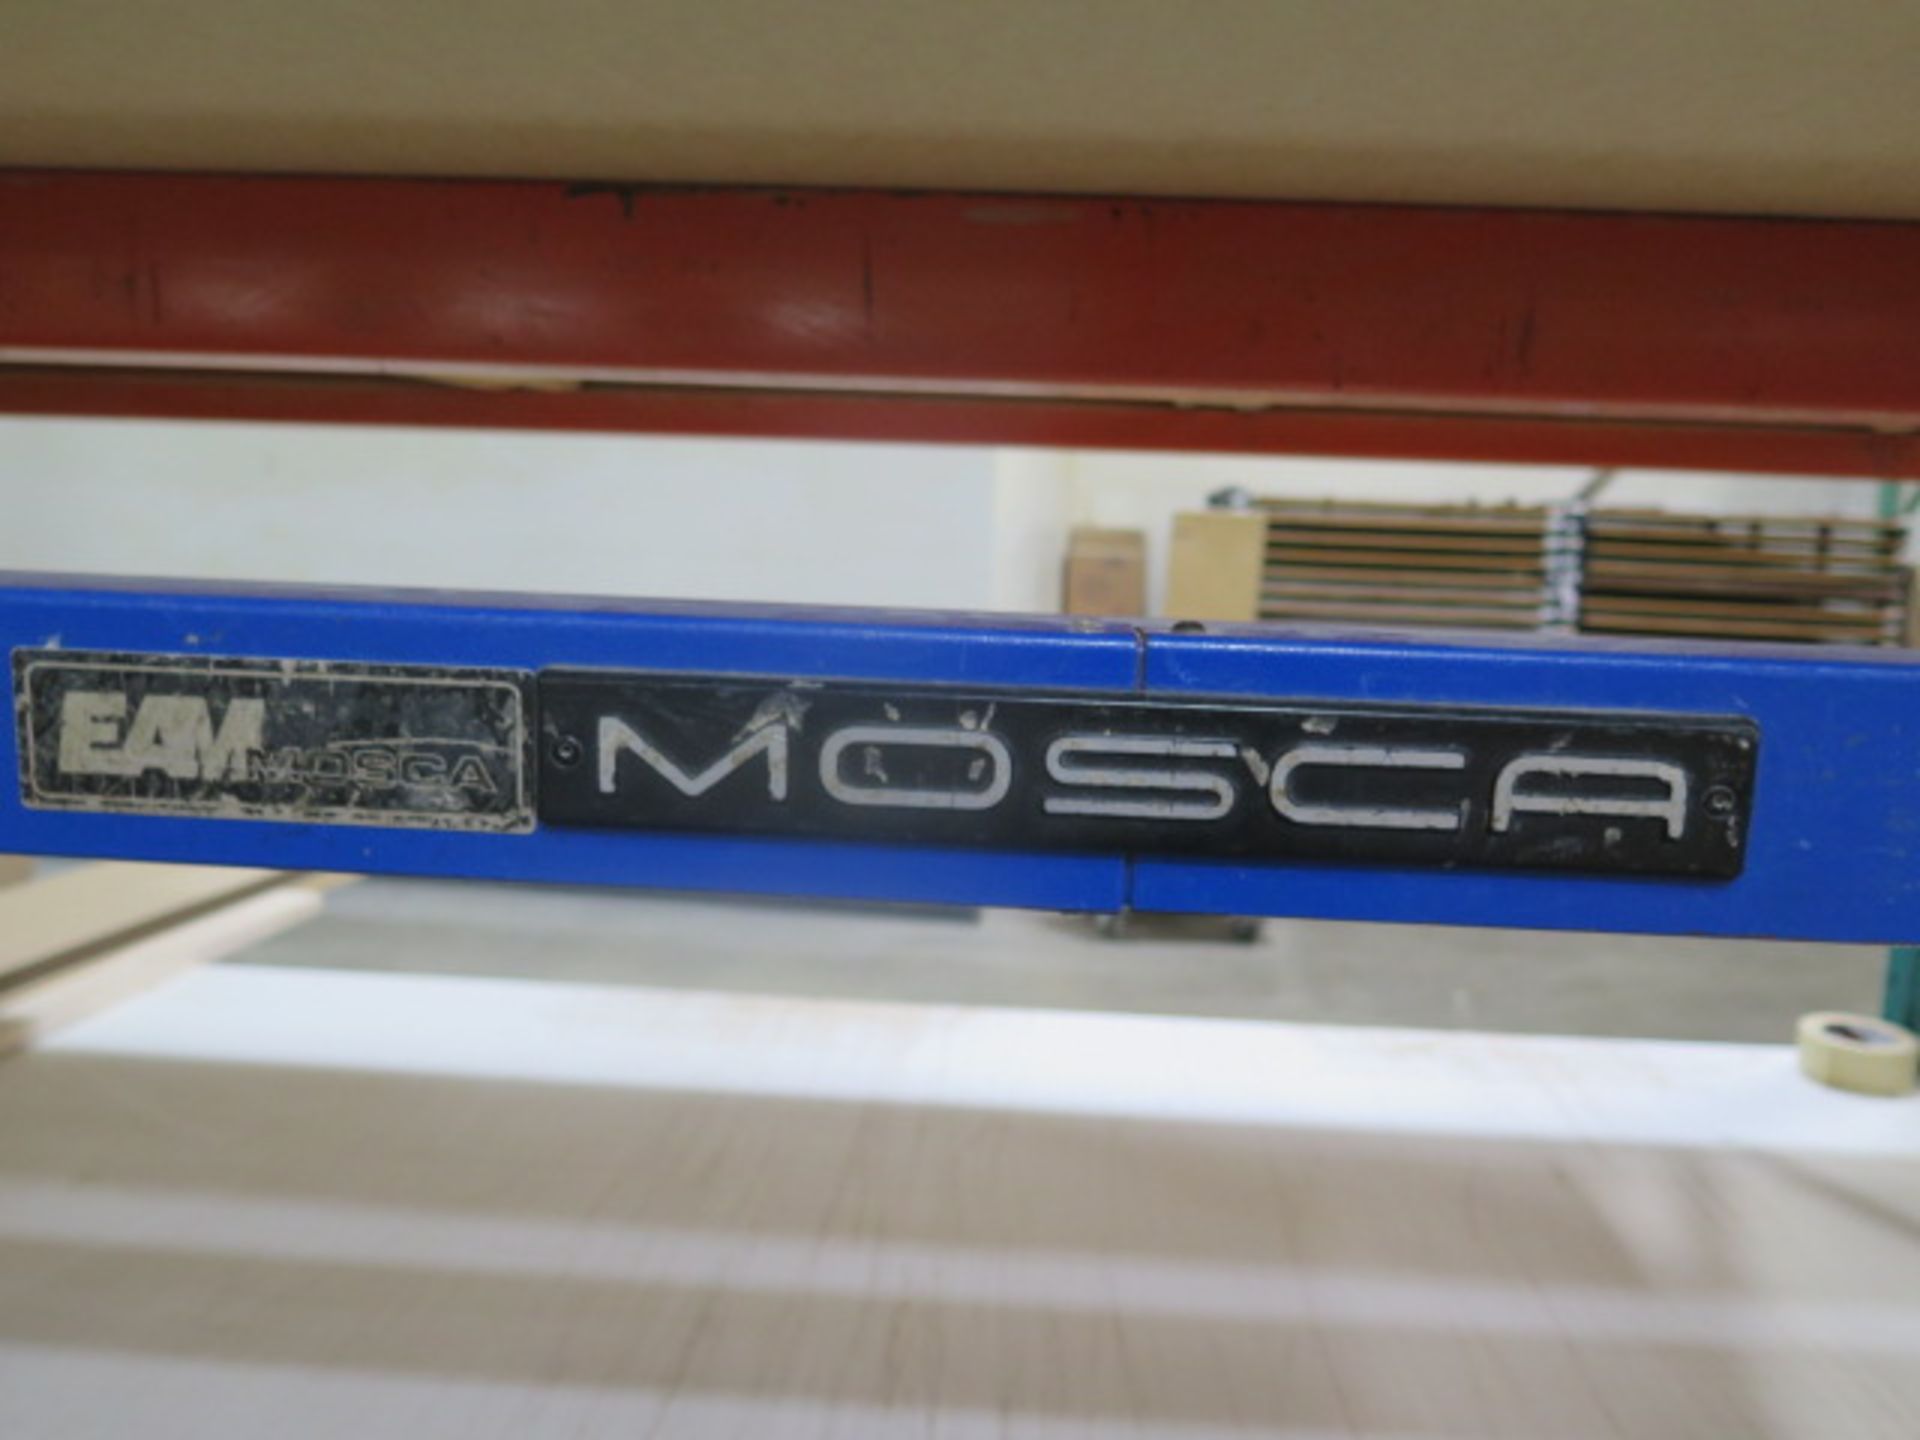 2004 Mosca RO-M-P4 Automatic Strapping Machine s/n 76698 w/ 67" x 19" Cap. (SOLD AS-IS - NO - Image 6 of 7